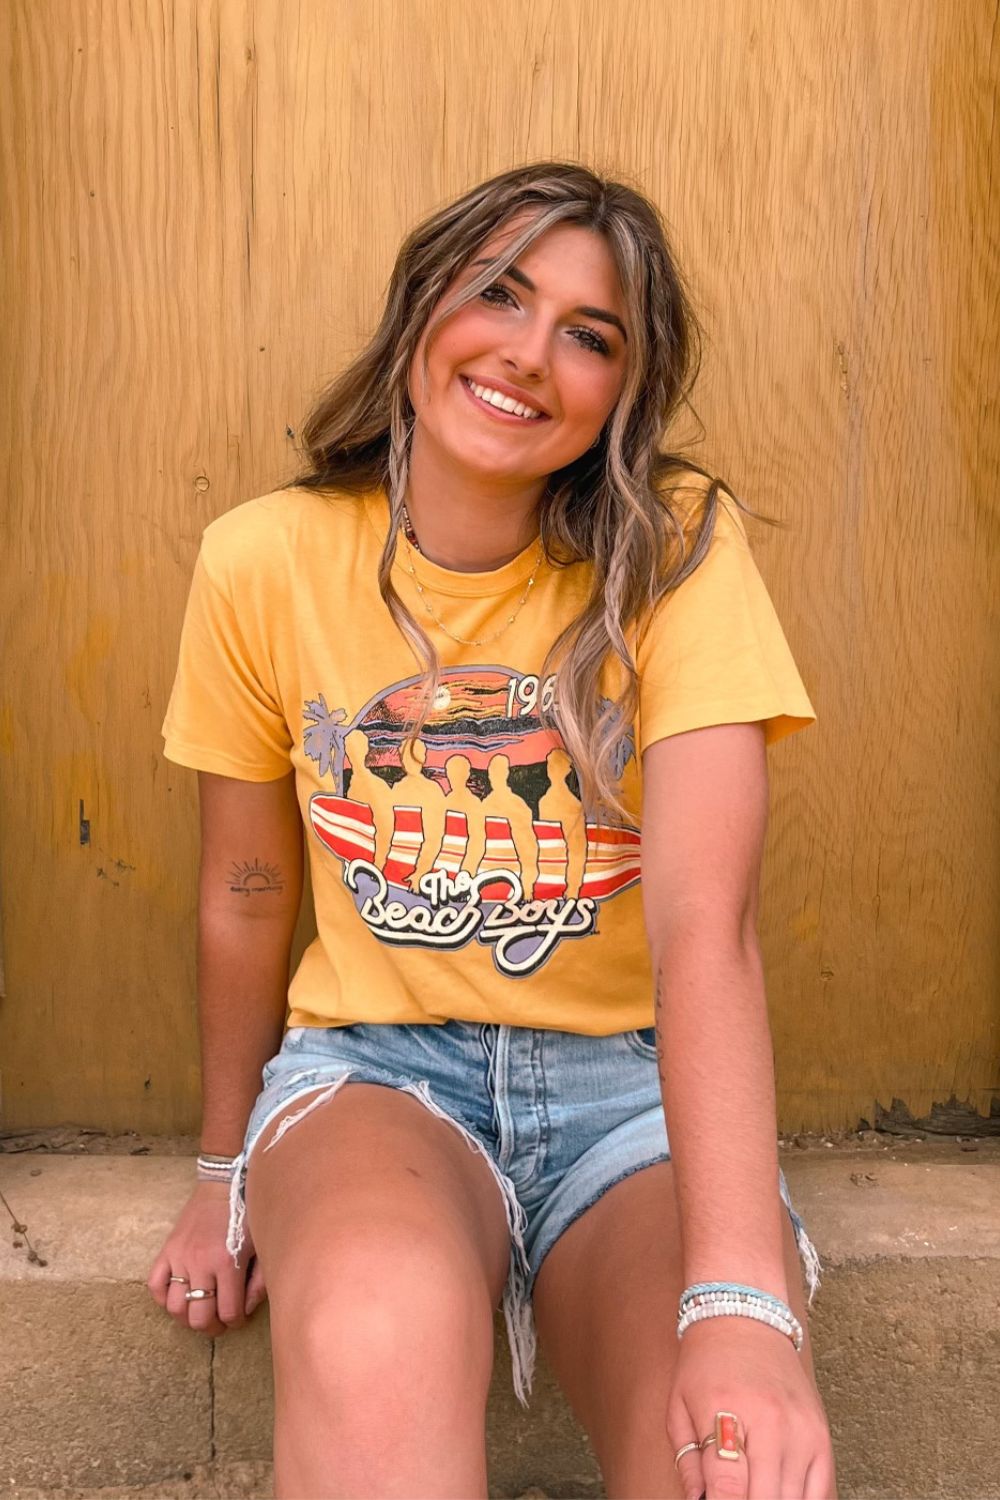 Daydreamer LA | The Beach Boys 1963 Ringer Tee - Women's Shirts & Tops - Blooming Daily